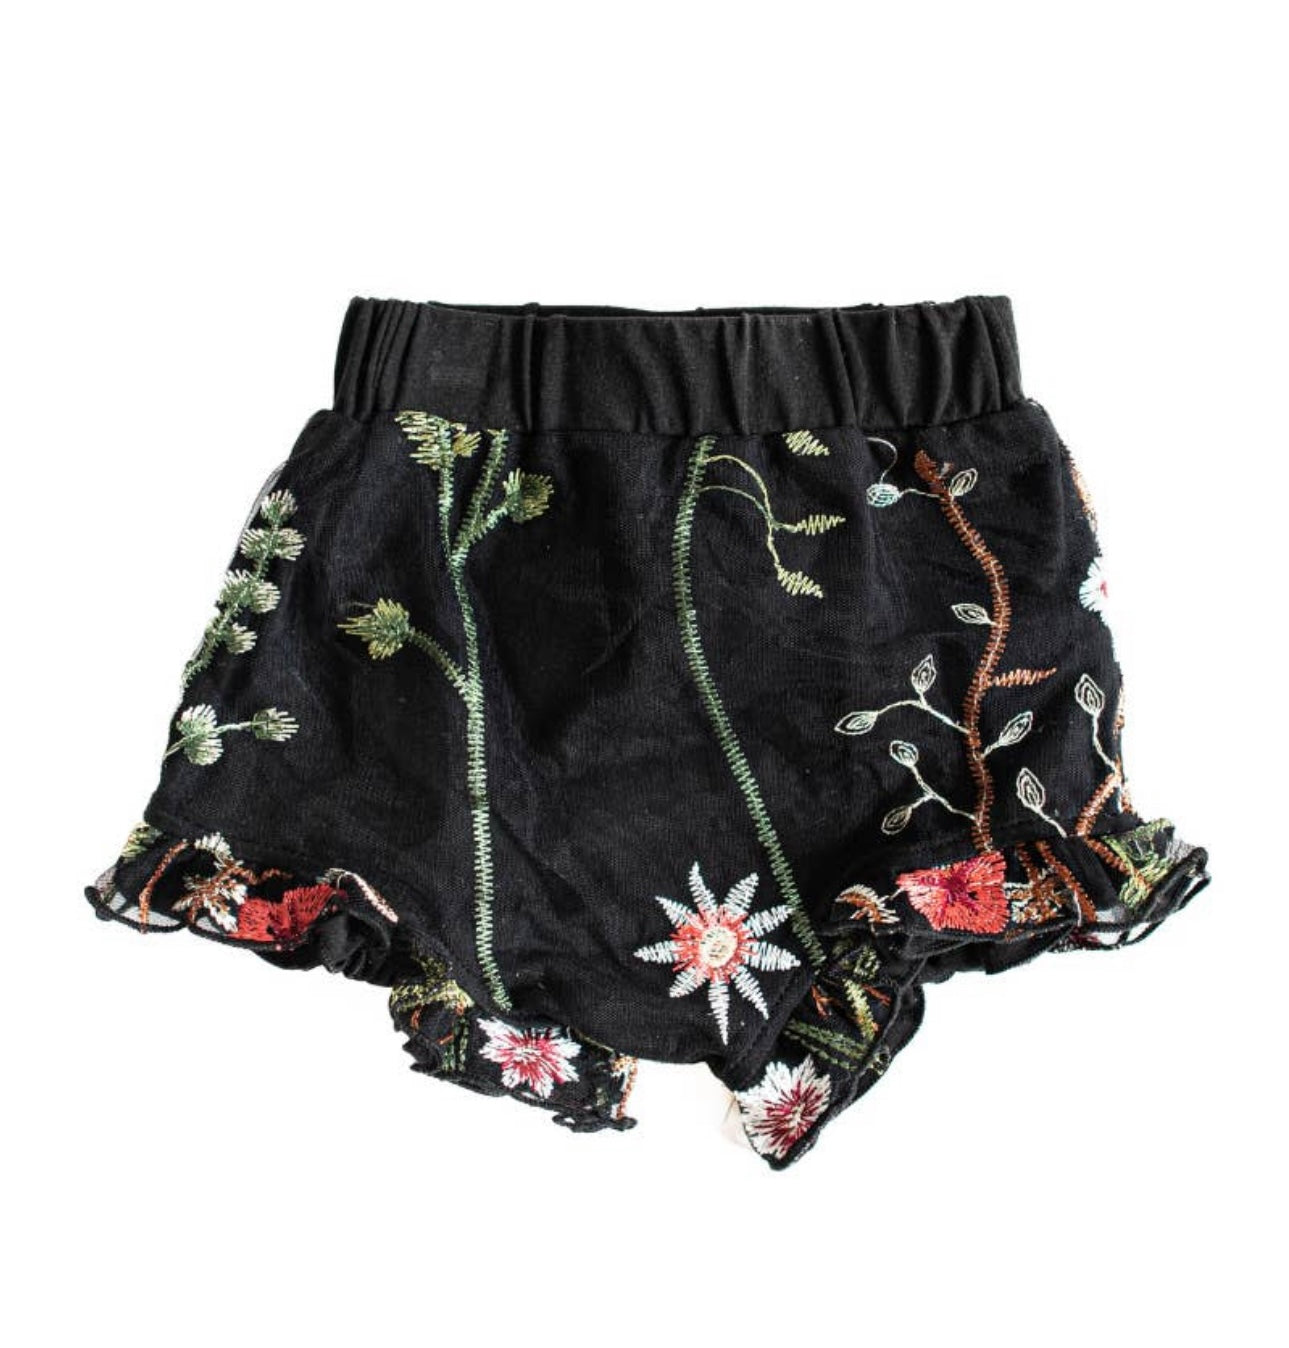 Belle Black High Waisted Floral Embroidery Bloomers